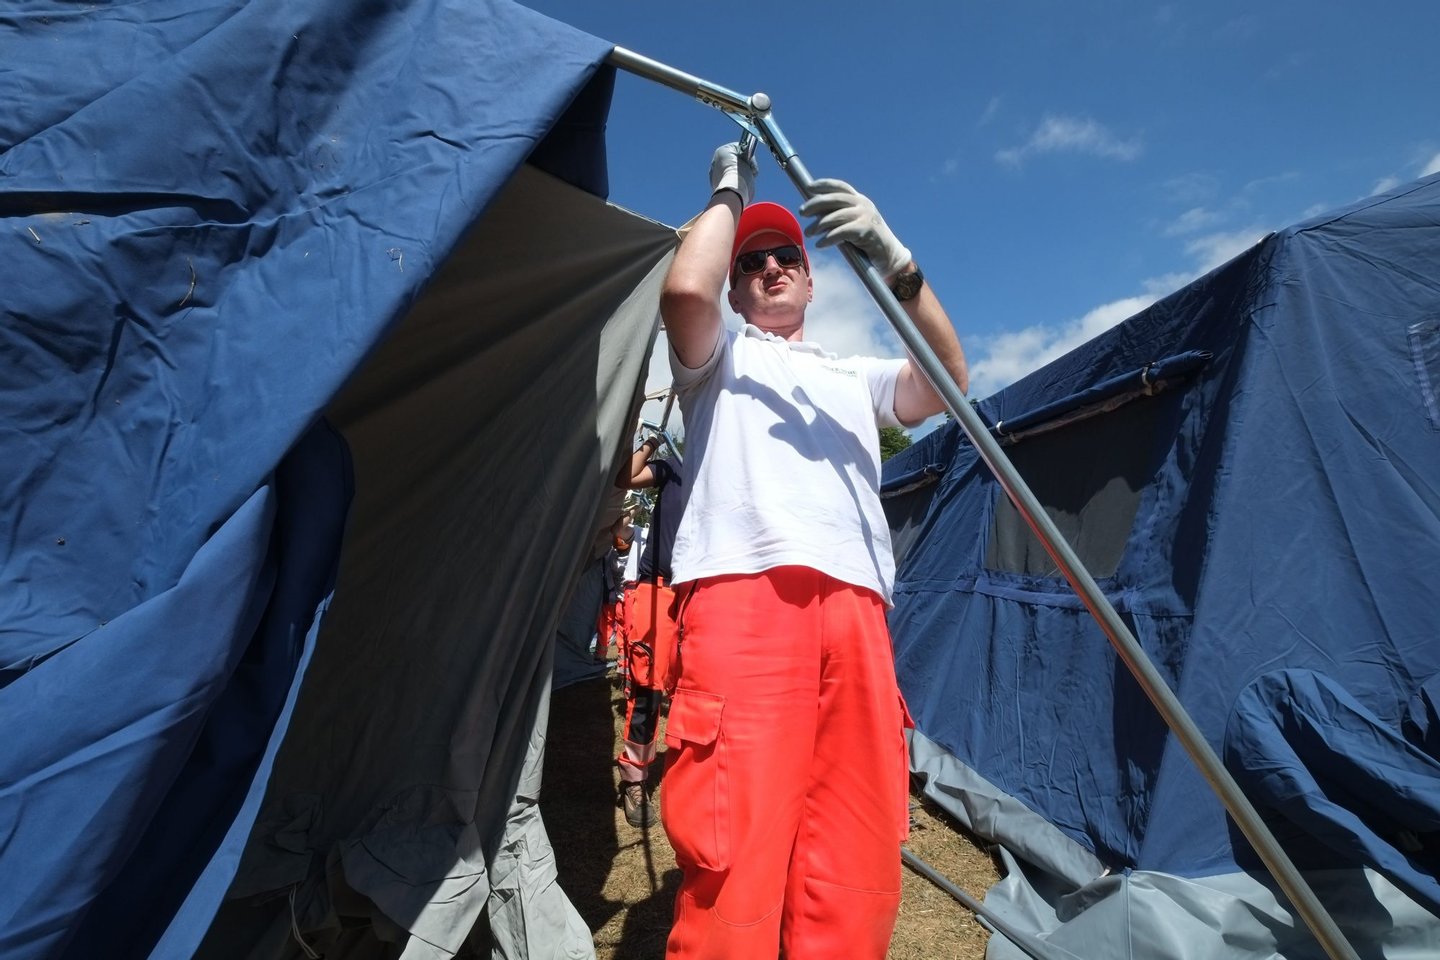 A volunteer erects a tent at a temporary encampment for residents of earthquake in the central Italian village of Amatrice, on August 25, 2016, a day after a 6.2-magnitude earthquake struck the region killing some 247 people. The death toll from a powerful earthquake in central Italy was revised downwards to 241 but officials cautioned it could rise again as rescuers continued a grim search for corpses, as powerful aftershocks rocked the devastated area. / AFP / MARIO LAPORTA (Photo credit should read MARIO LAPORTA/AFP/Getty Images)